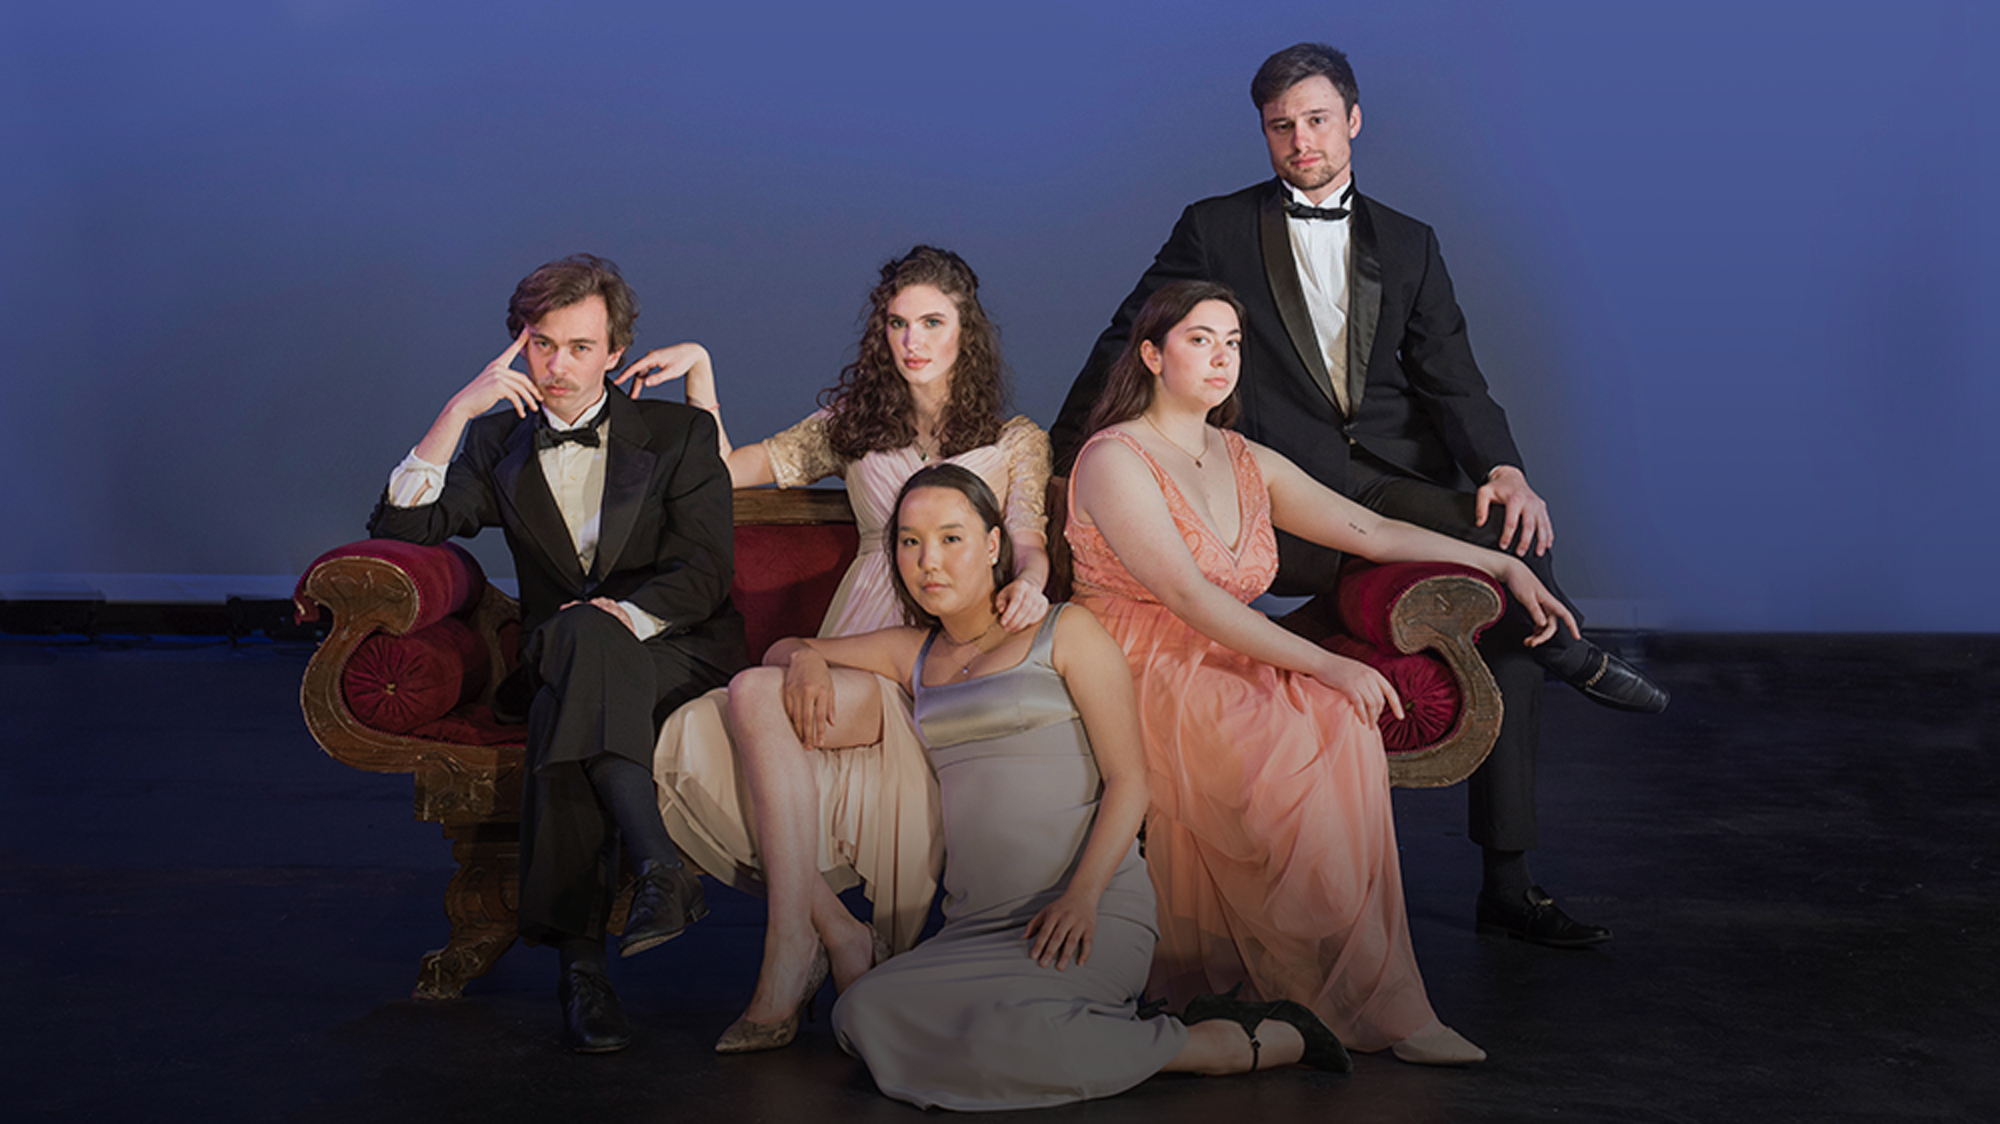 Students wearing black tie clothing while posed on a couch on the stage of LeFevre Theatre